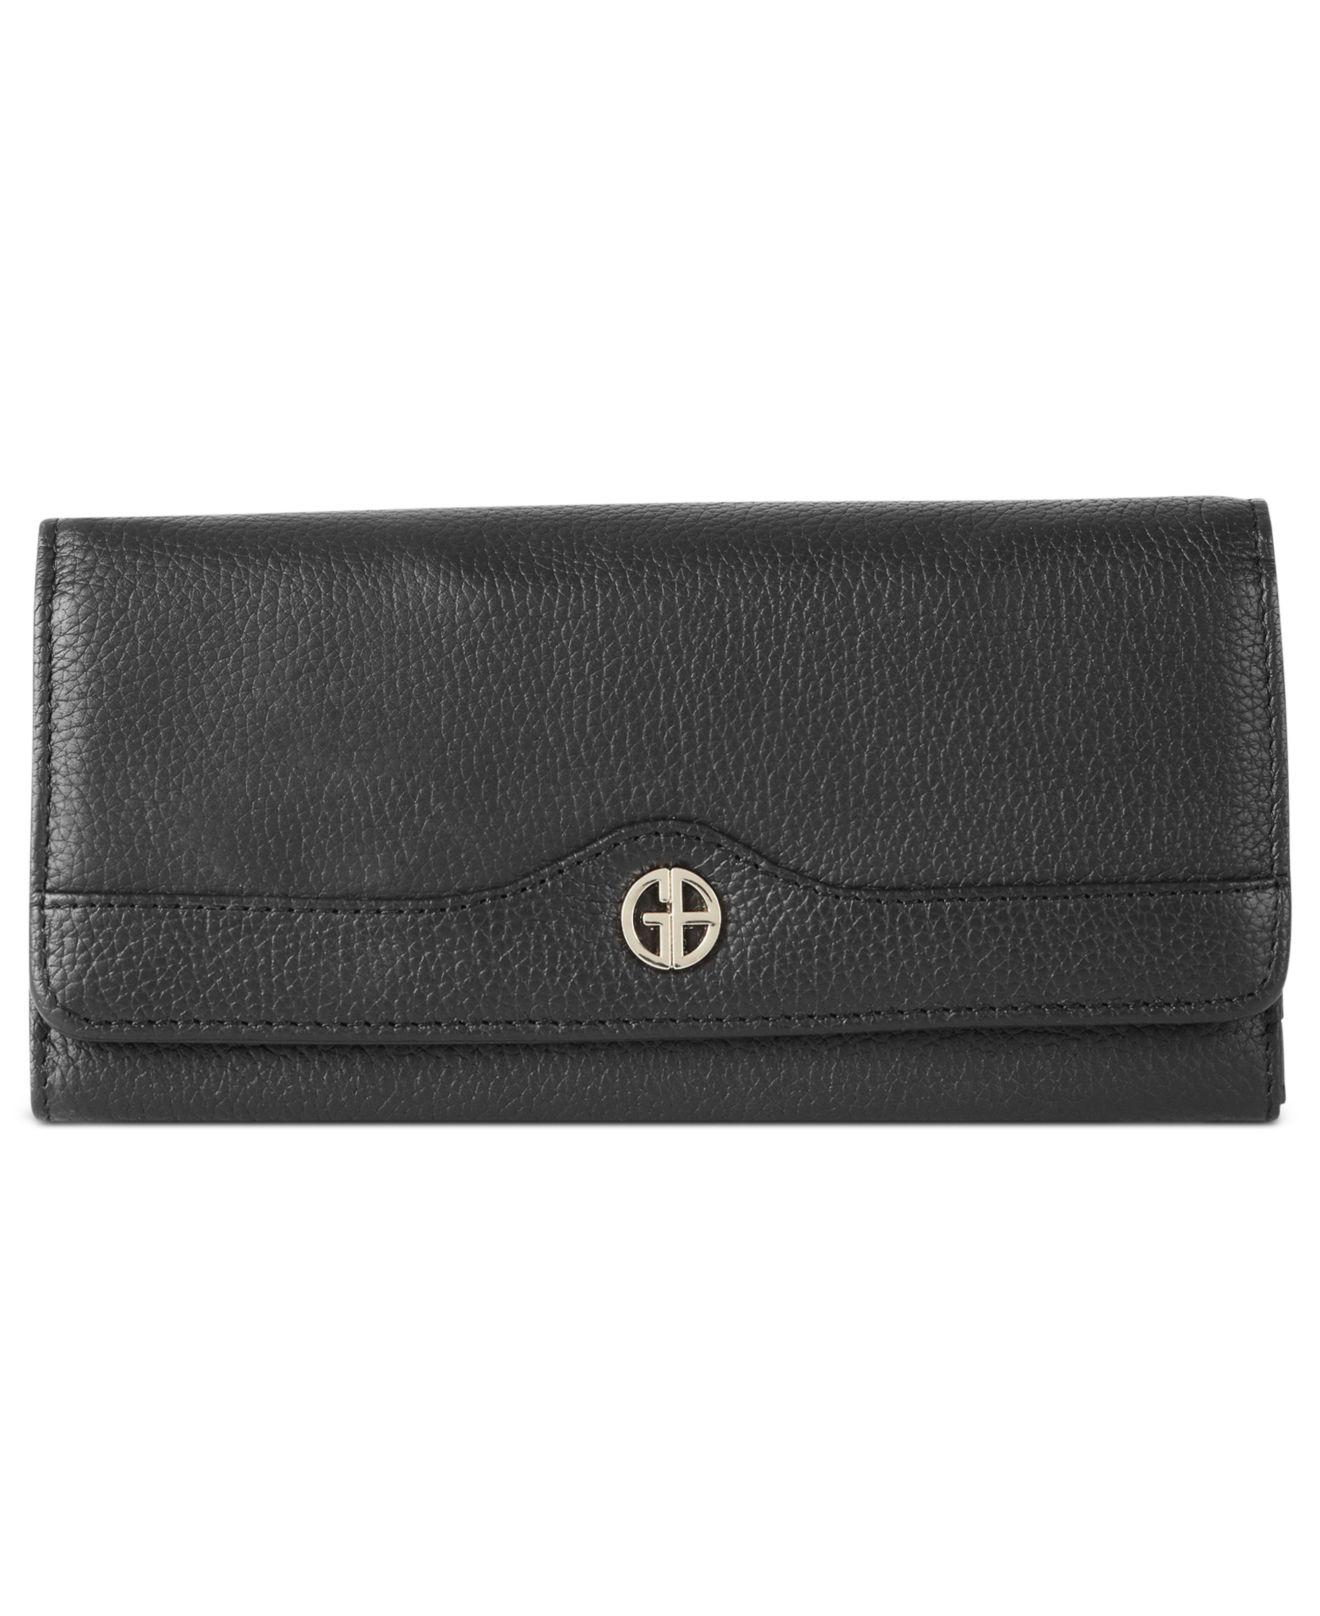 Giani Bernini Pebble Leather Receipt Wallet, Created For Macy's in ...